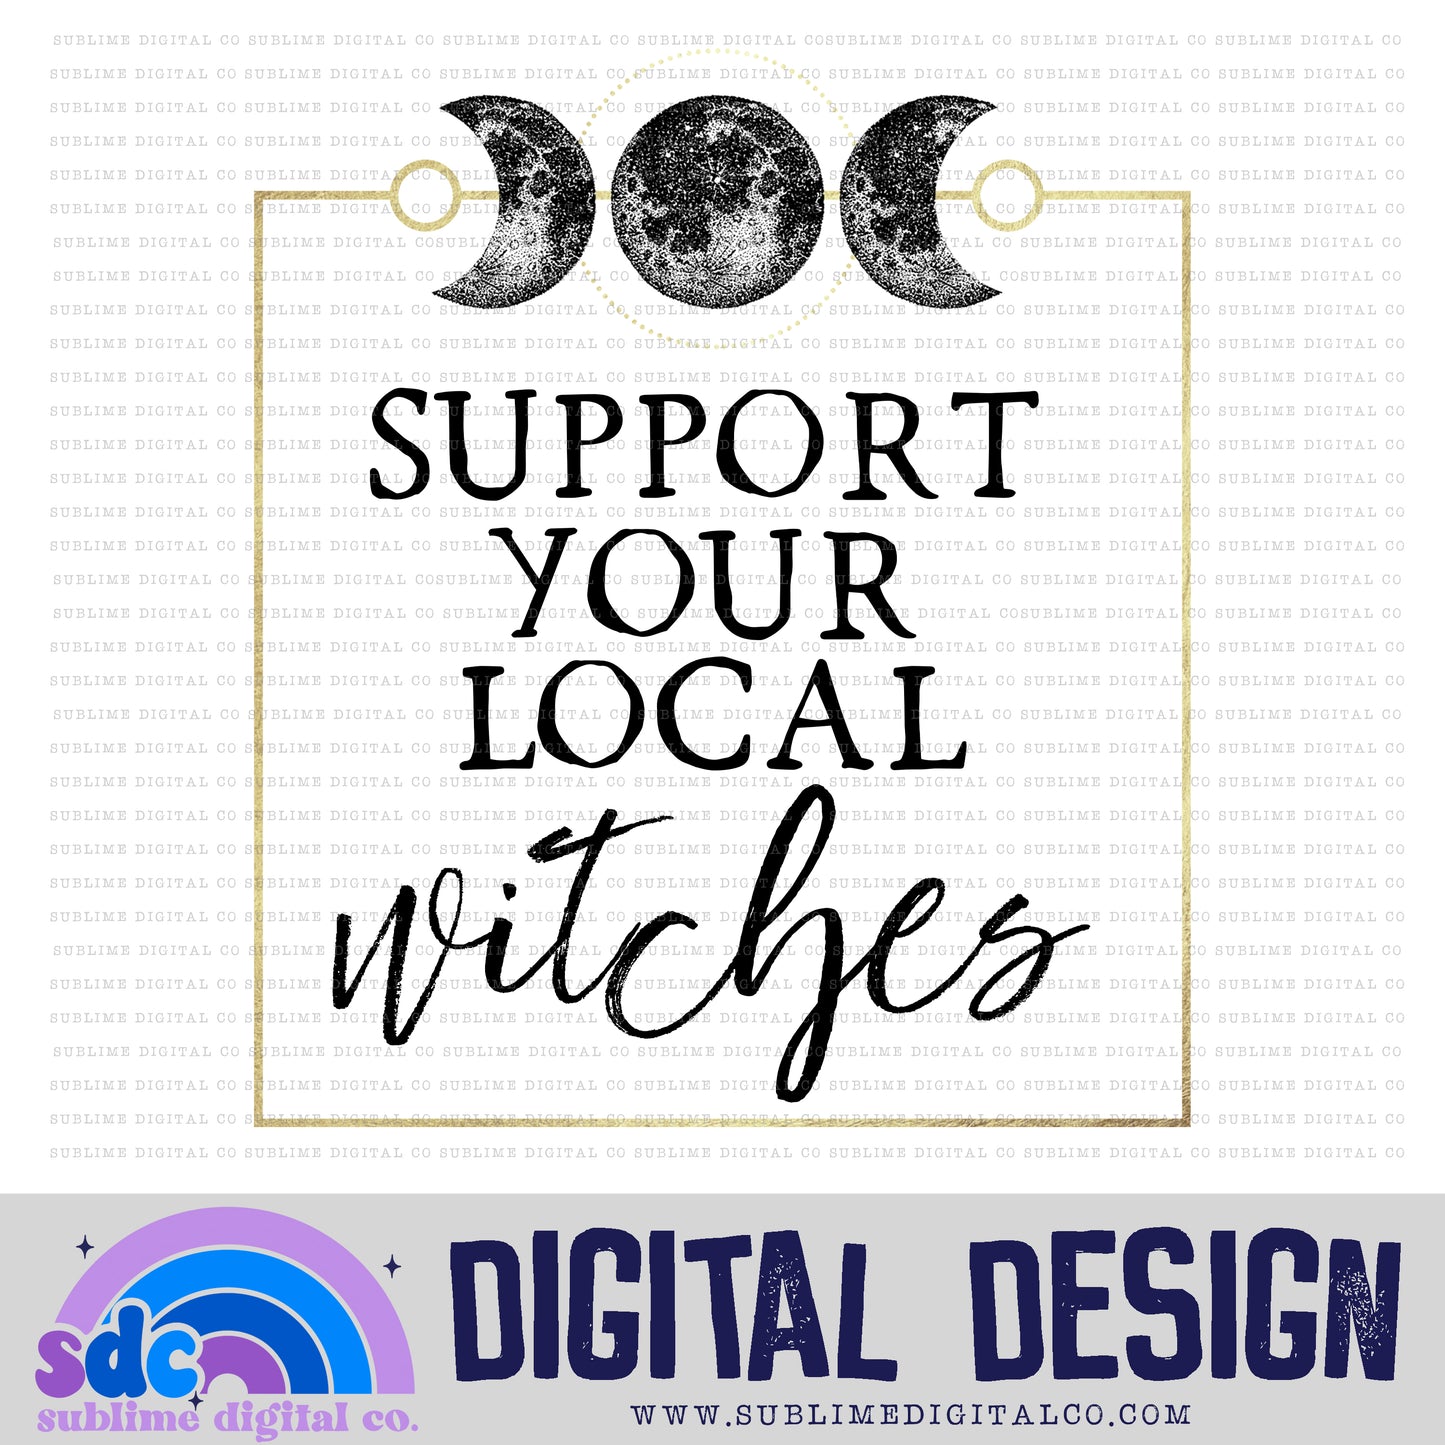 Support Your Local Witches • Witchy • Instant Download • Sublimation Design